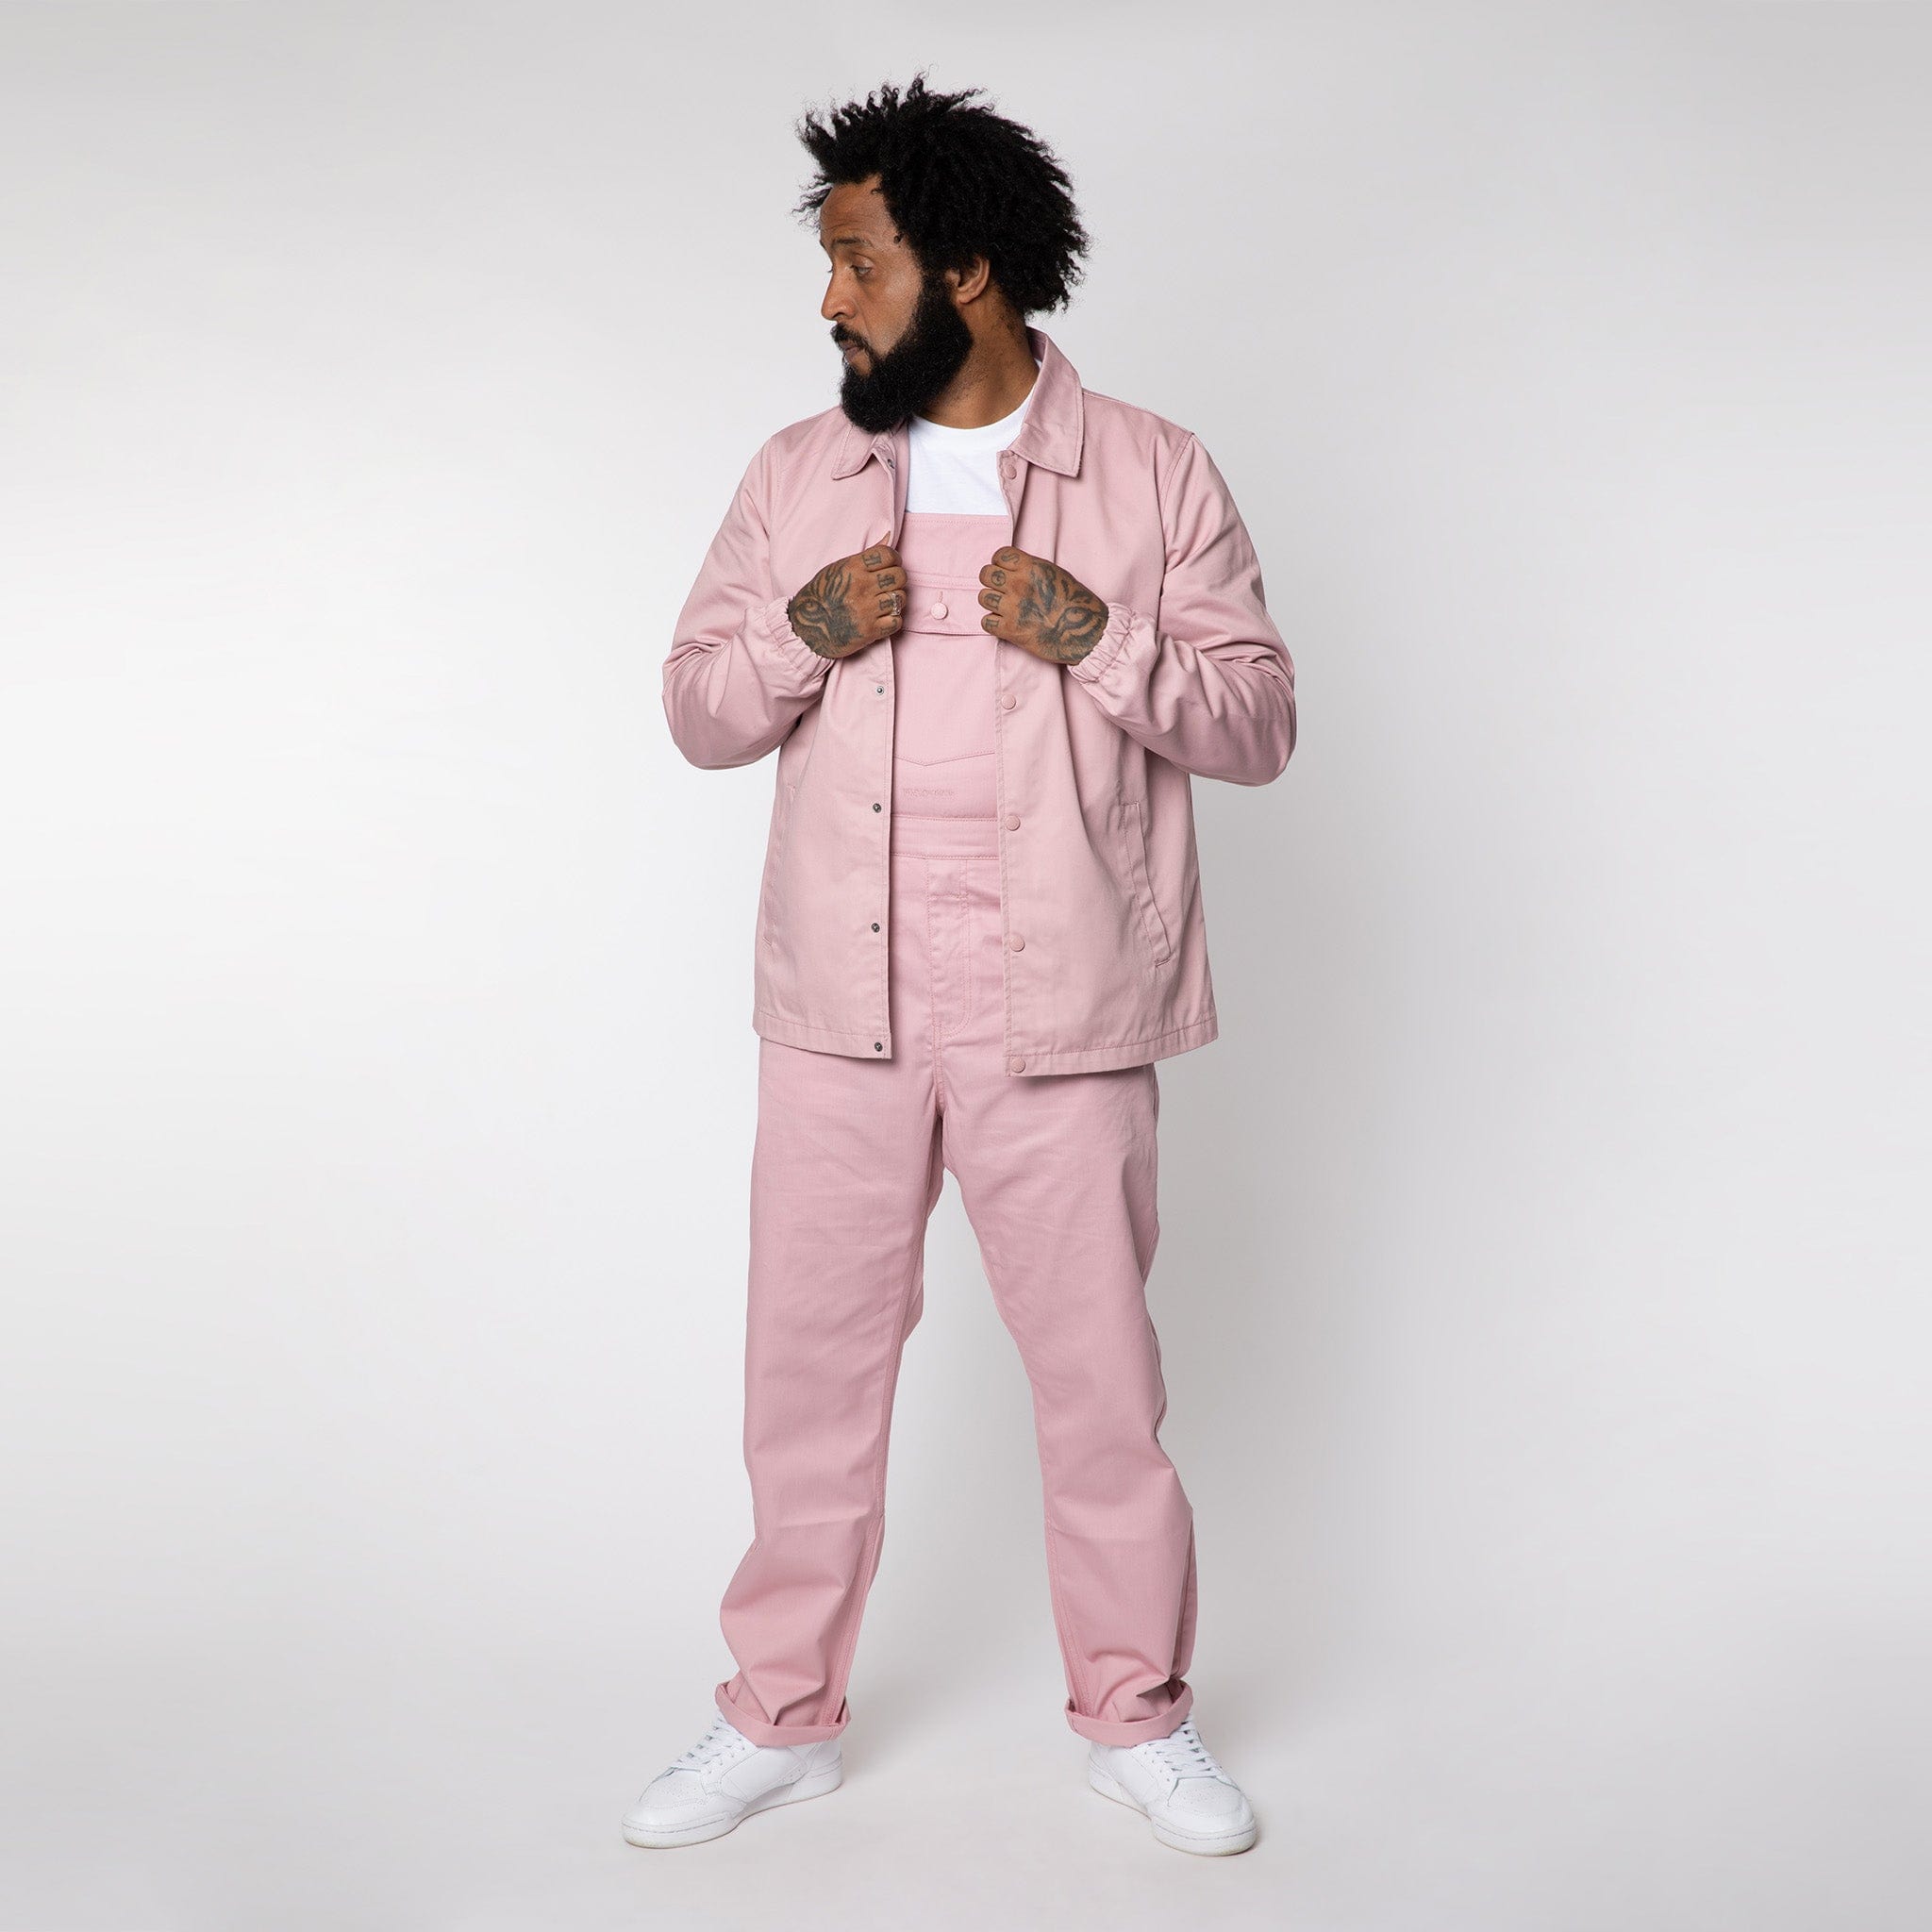 Men's Polycotton Pink Dungarees Worn With Dusty Pink Work Jacket.